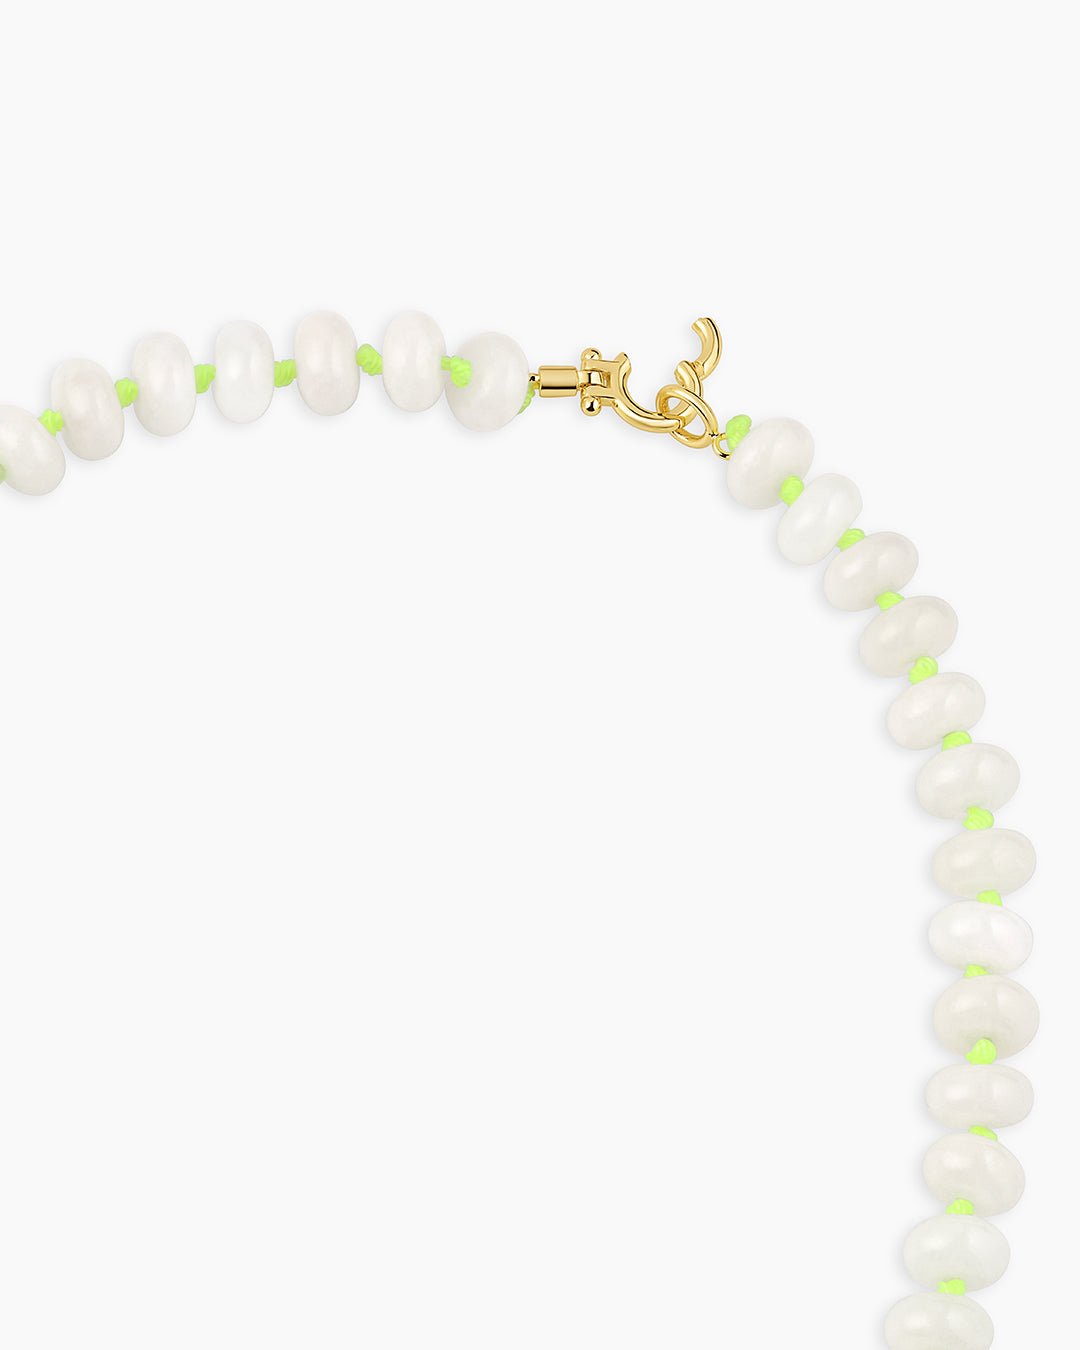 Palma Necklace (White Chalcedony) || option::Gold Plated, White Chalcedony